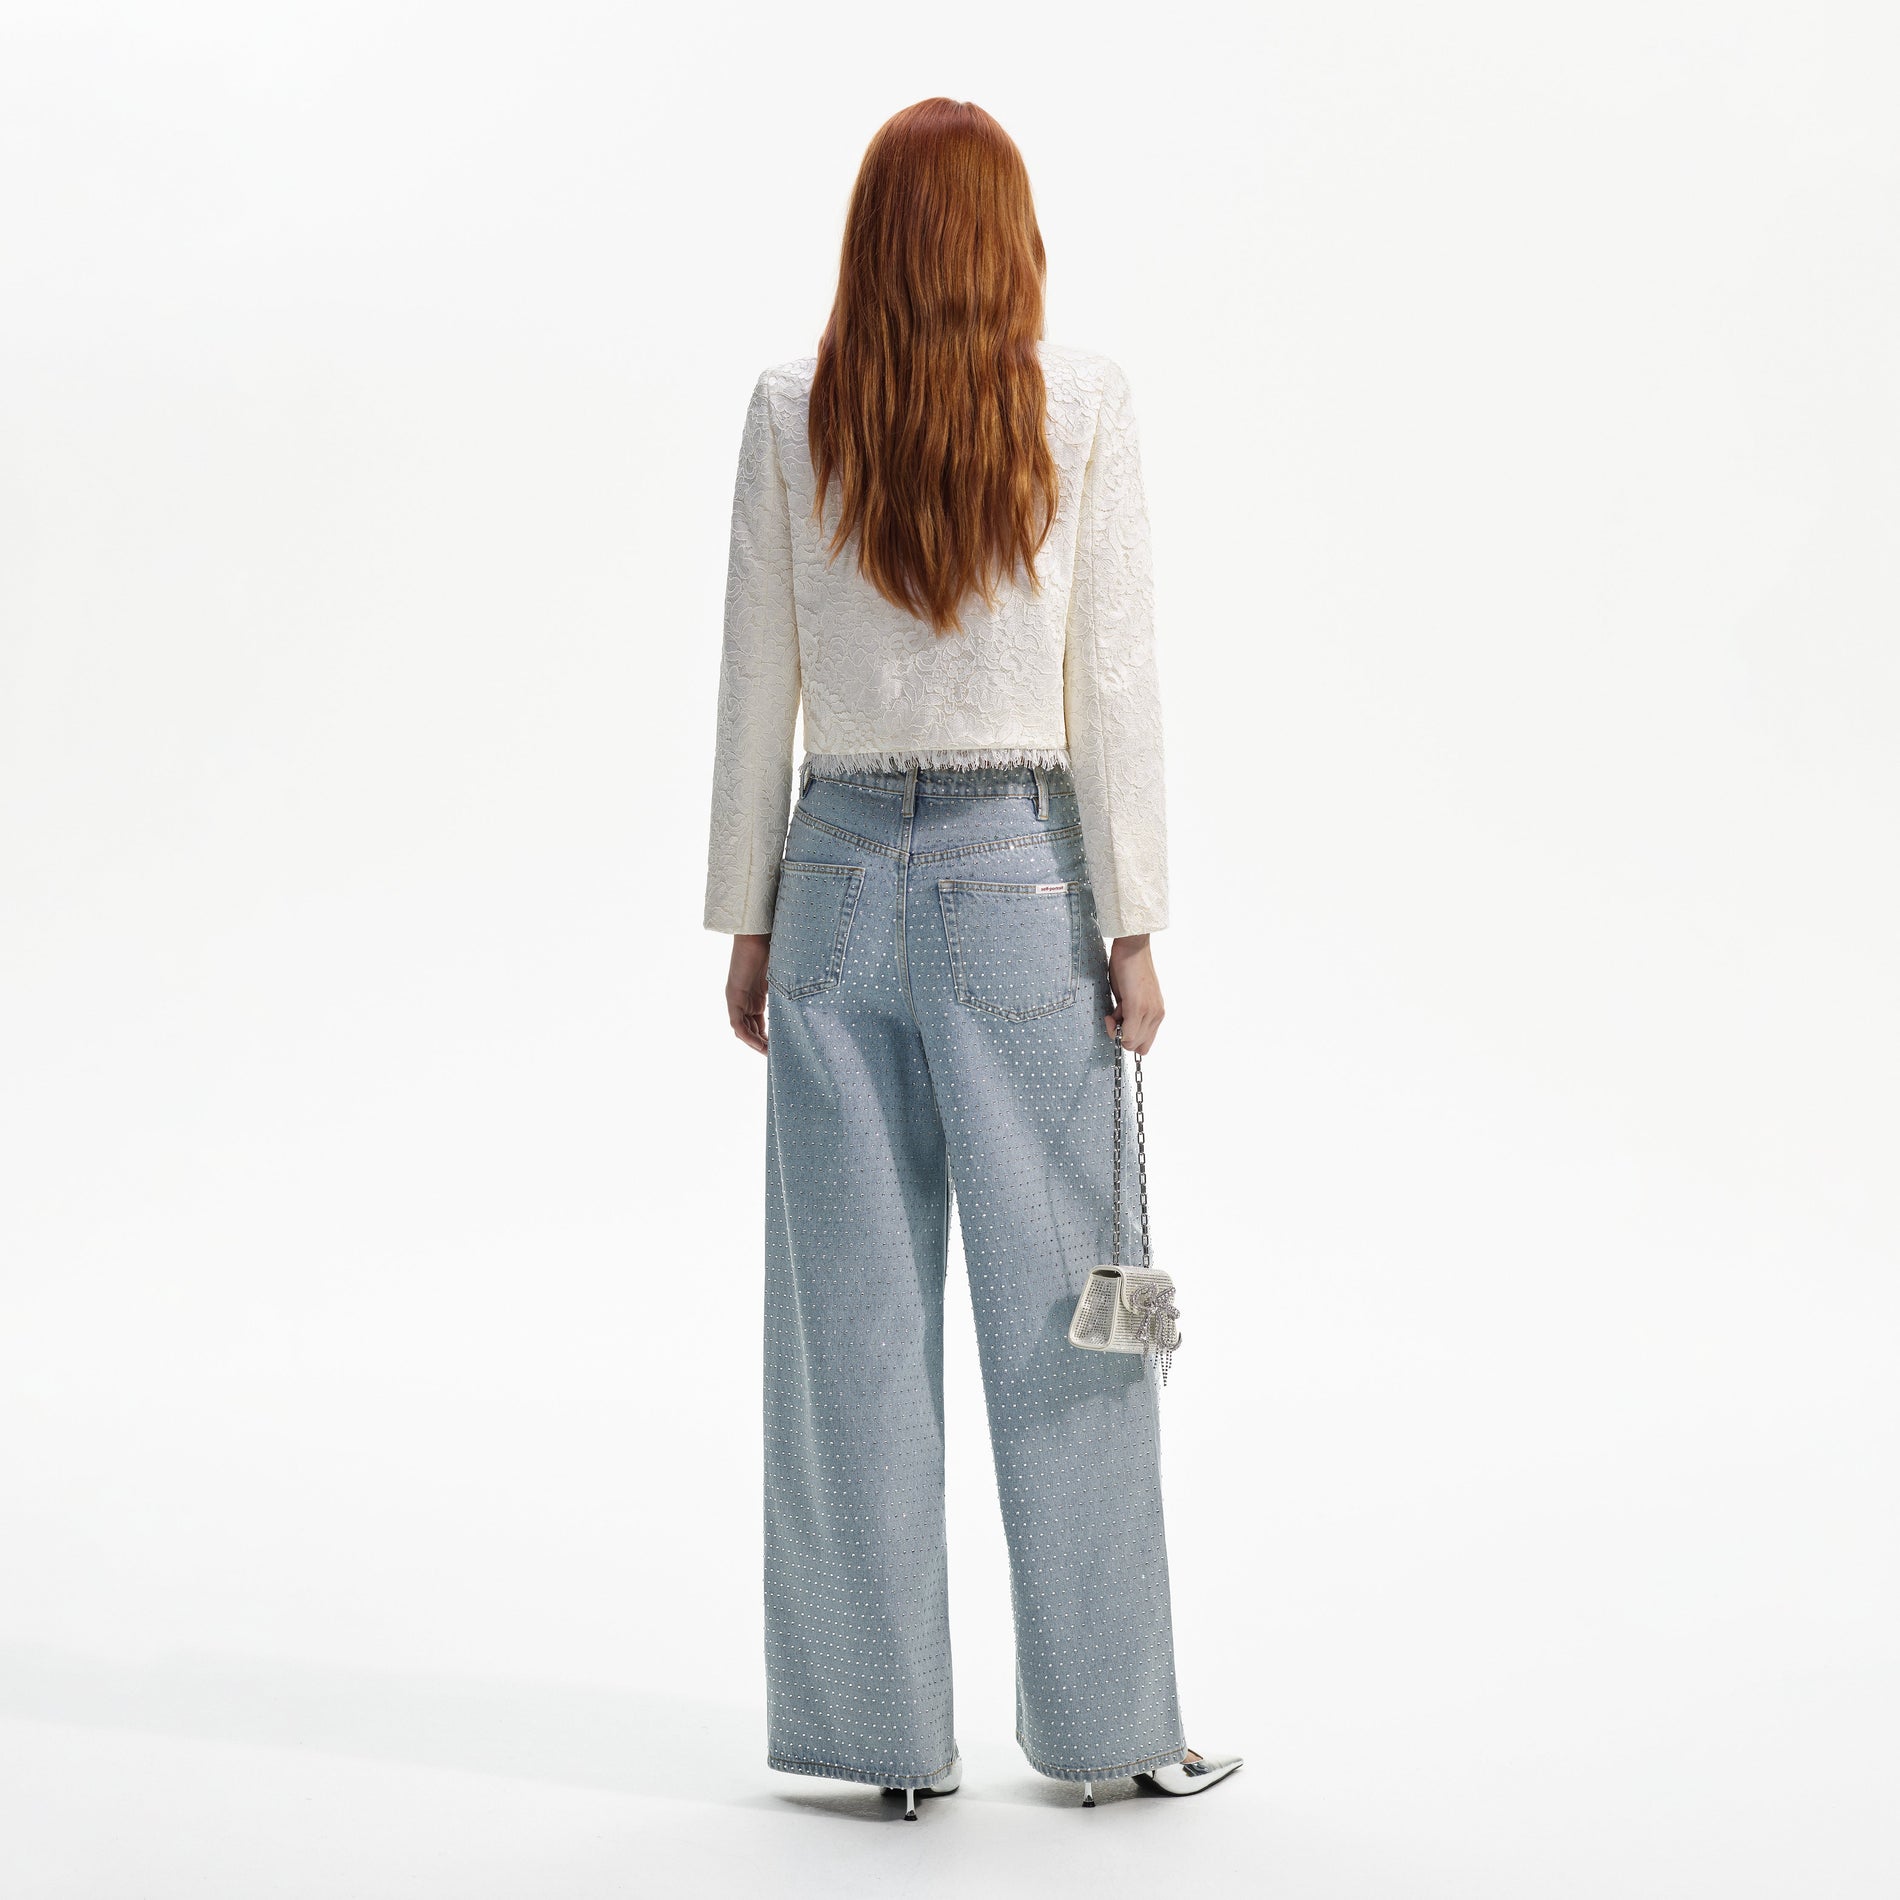 How to wear wide-leg jeans, The Independent